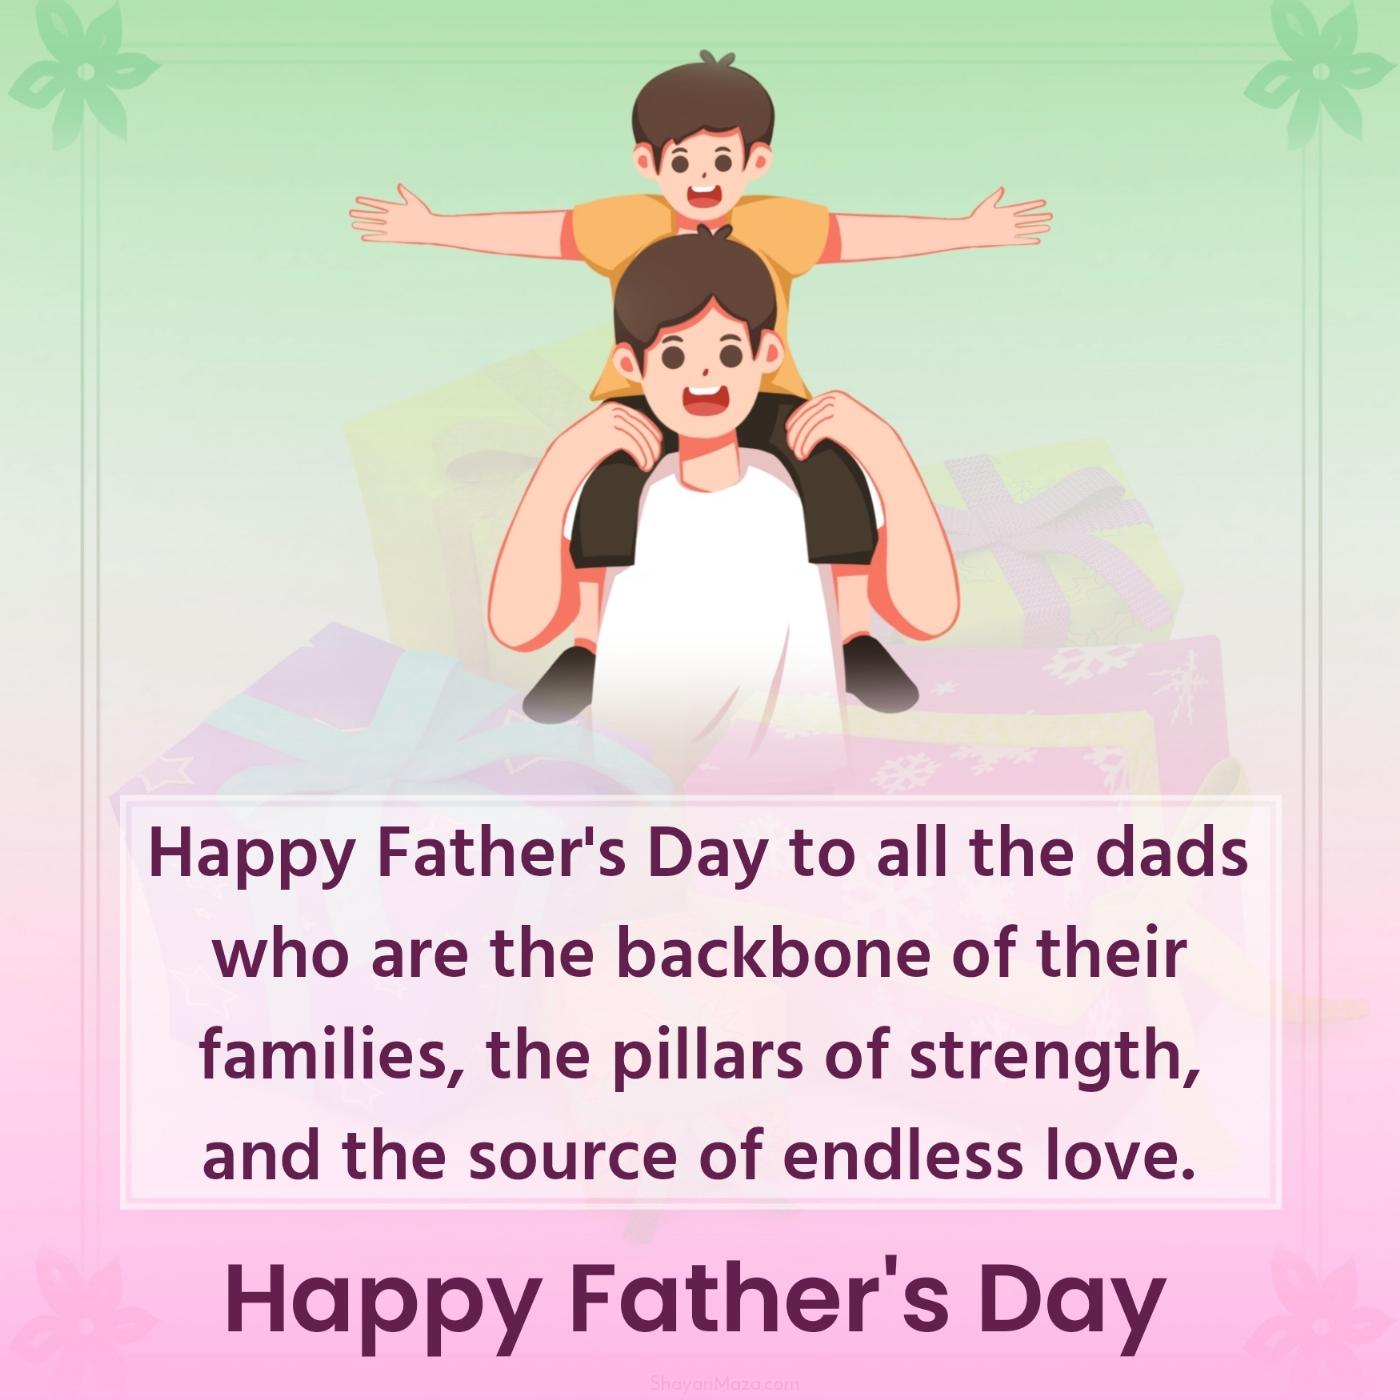 Happy Father's Day to all the dads who are the backbone of their families